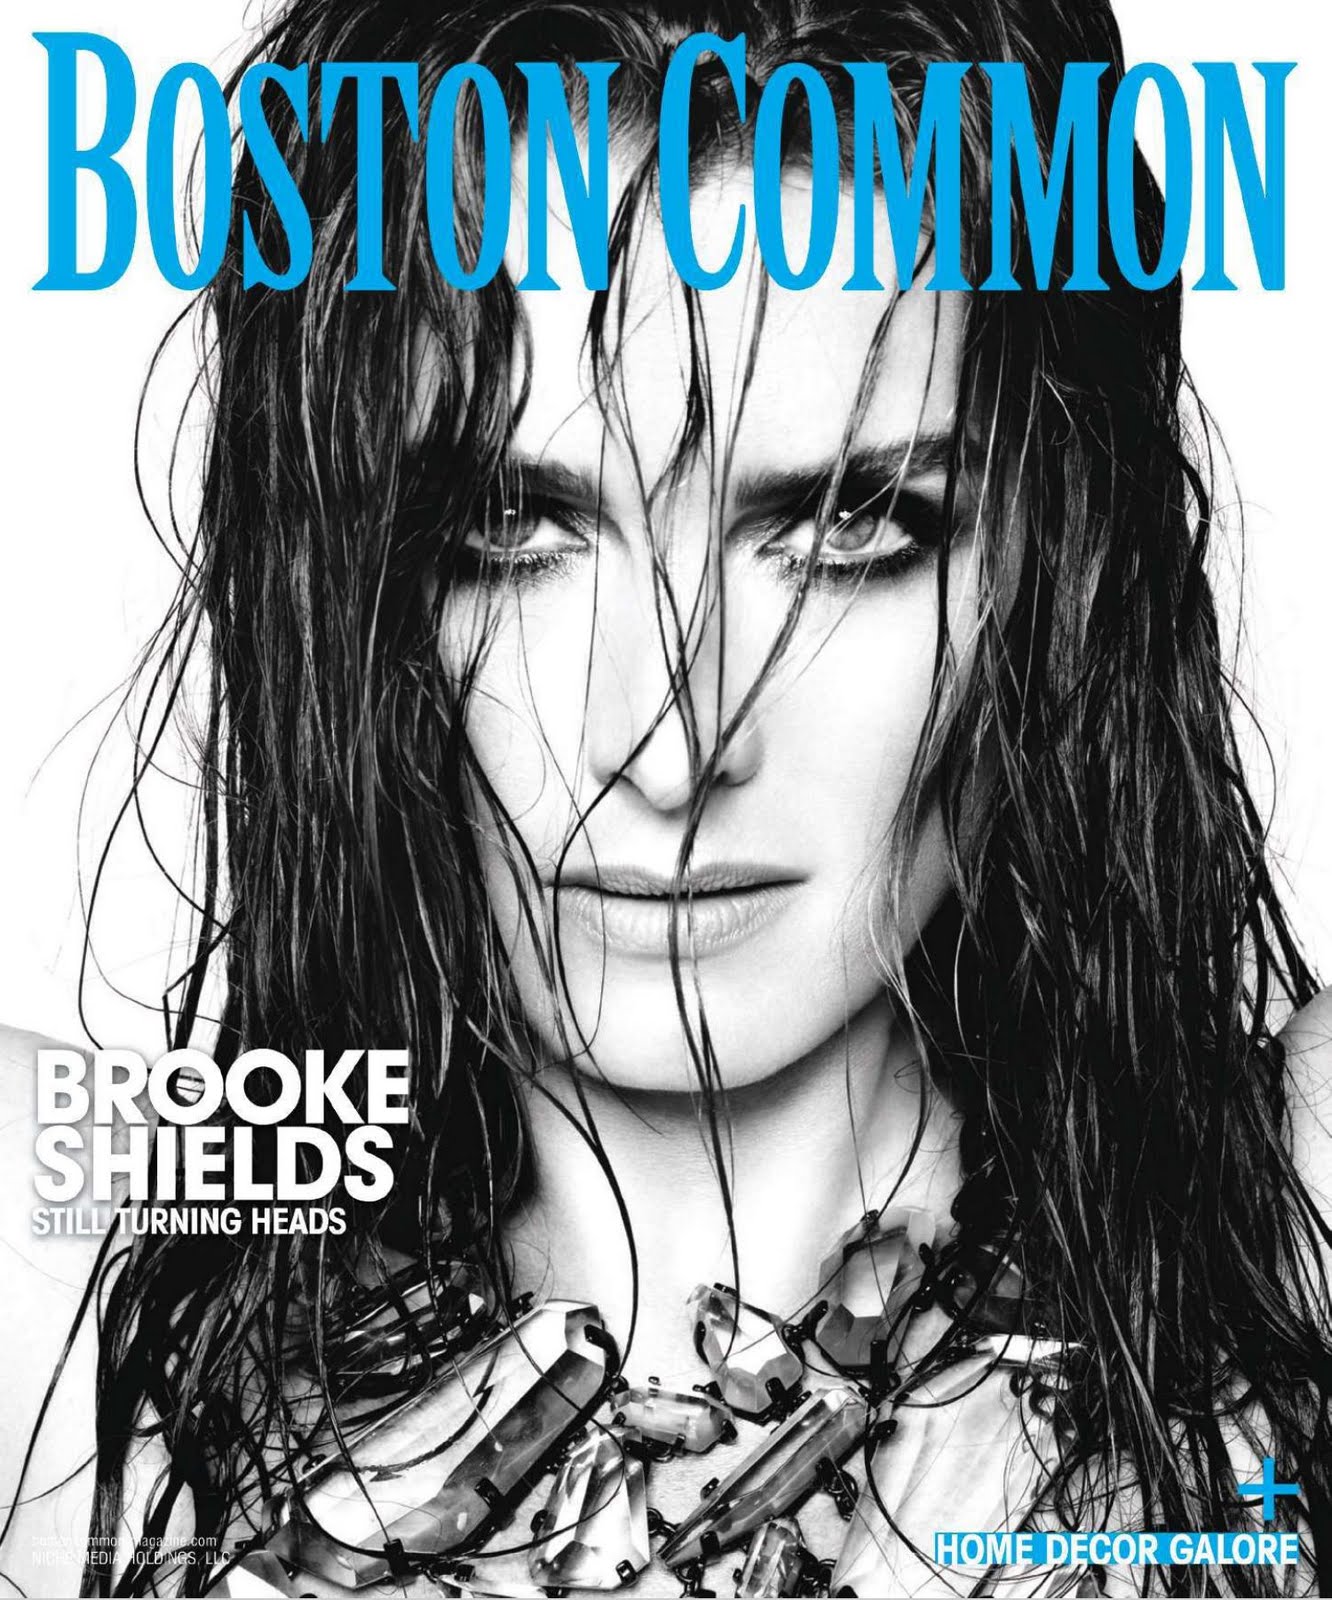 Brooke+Shields+by+Ruven+Afanador+%28Boston+Common+Magazine+May-June+2010%29.jpg